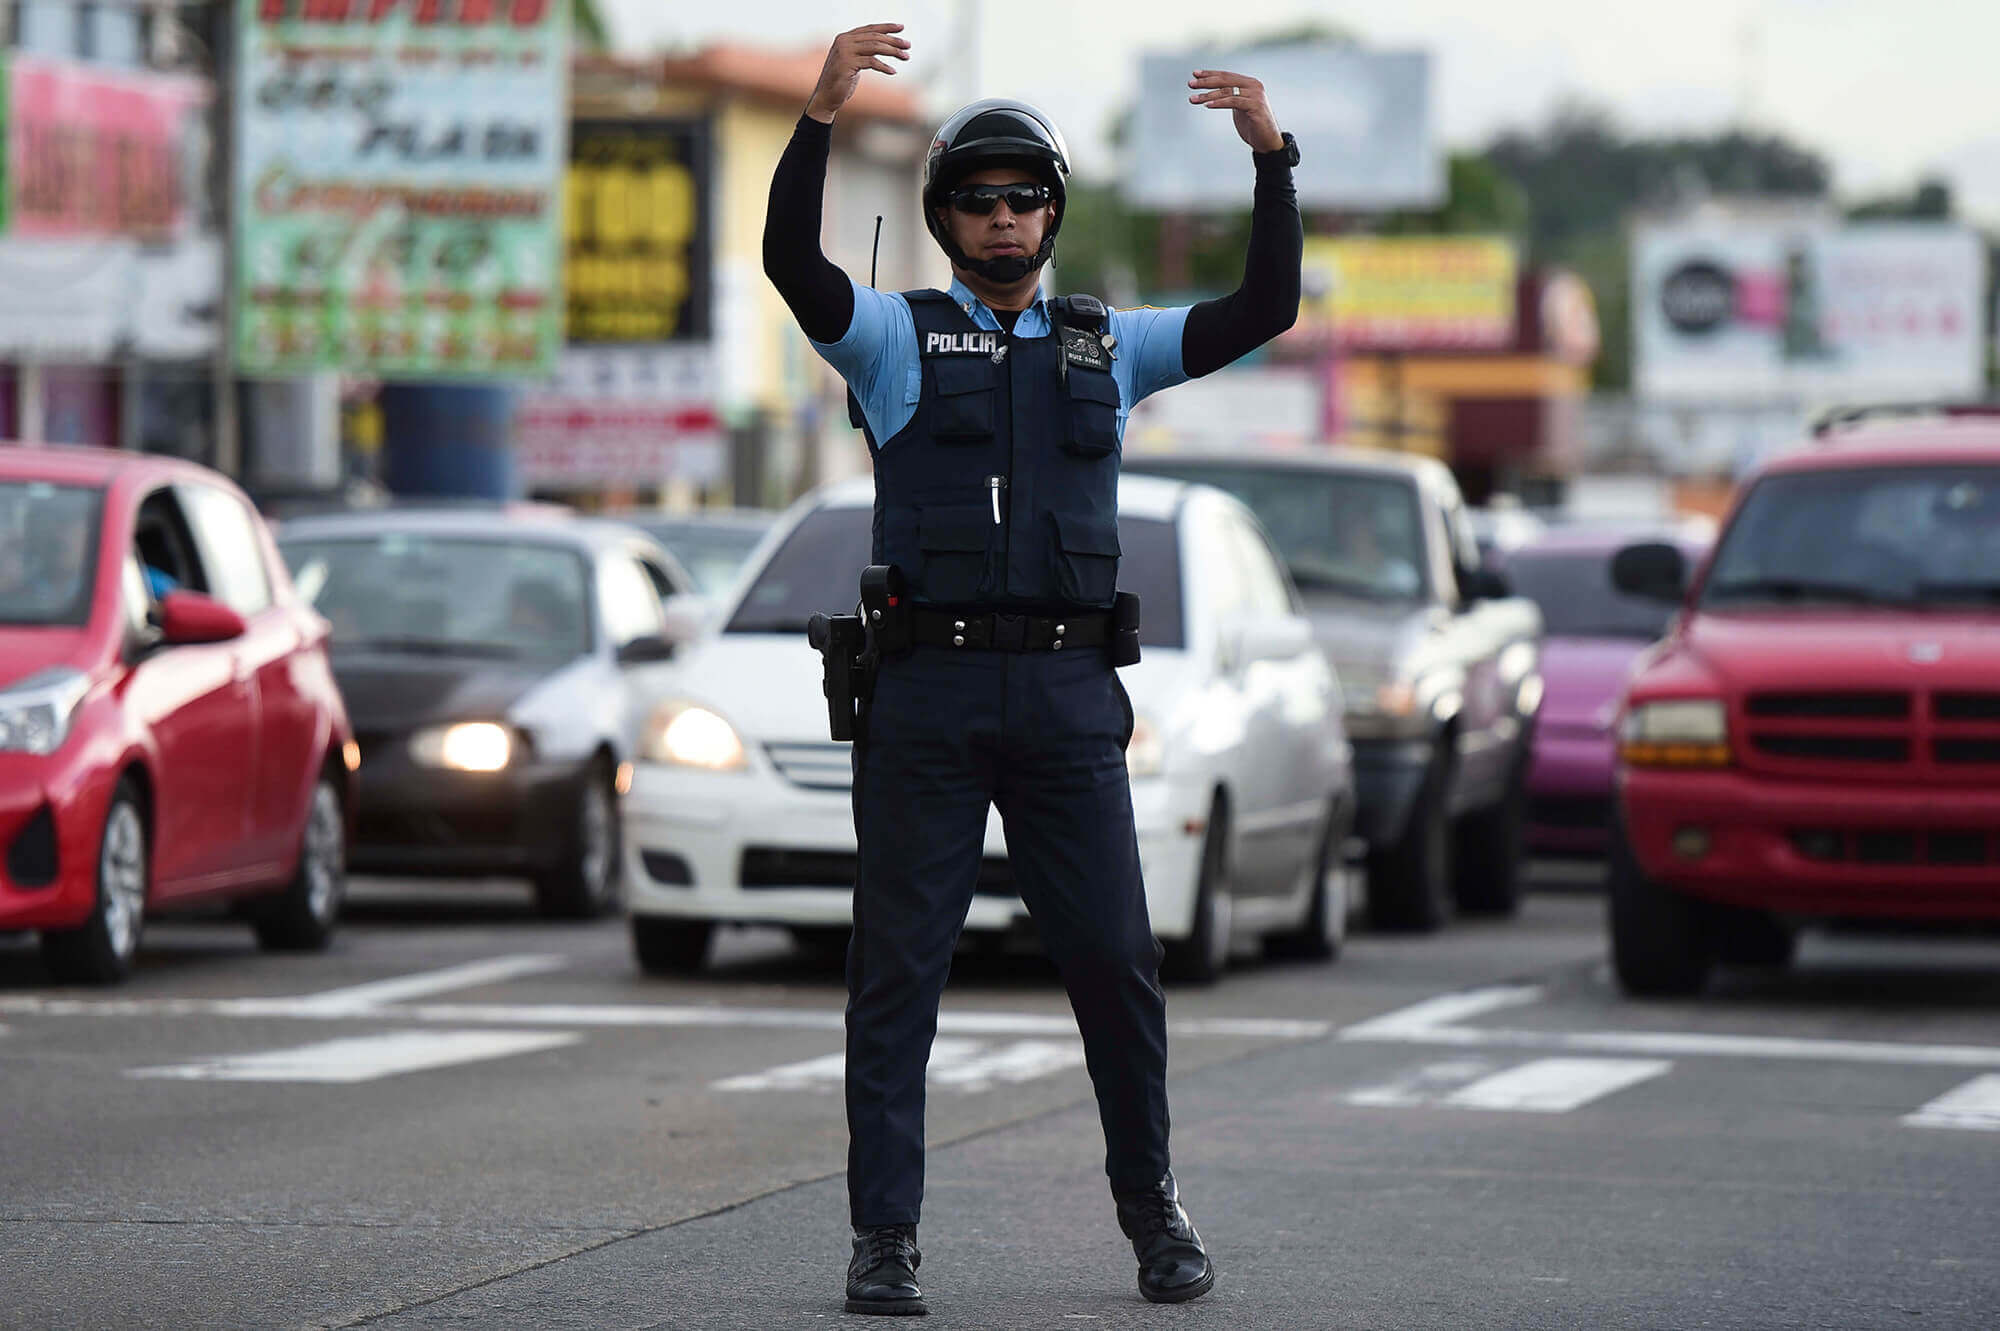 Image of Puerto Rican police officer directing traffic in blackout